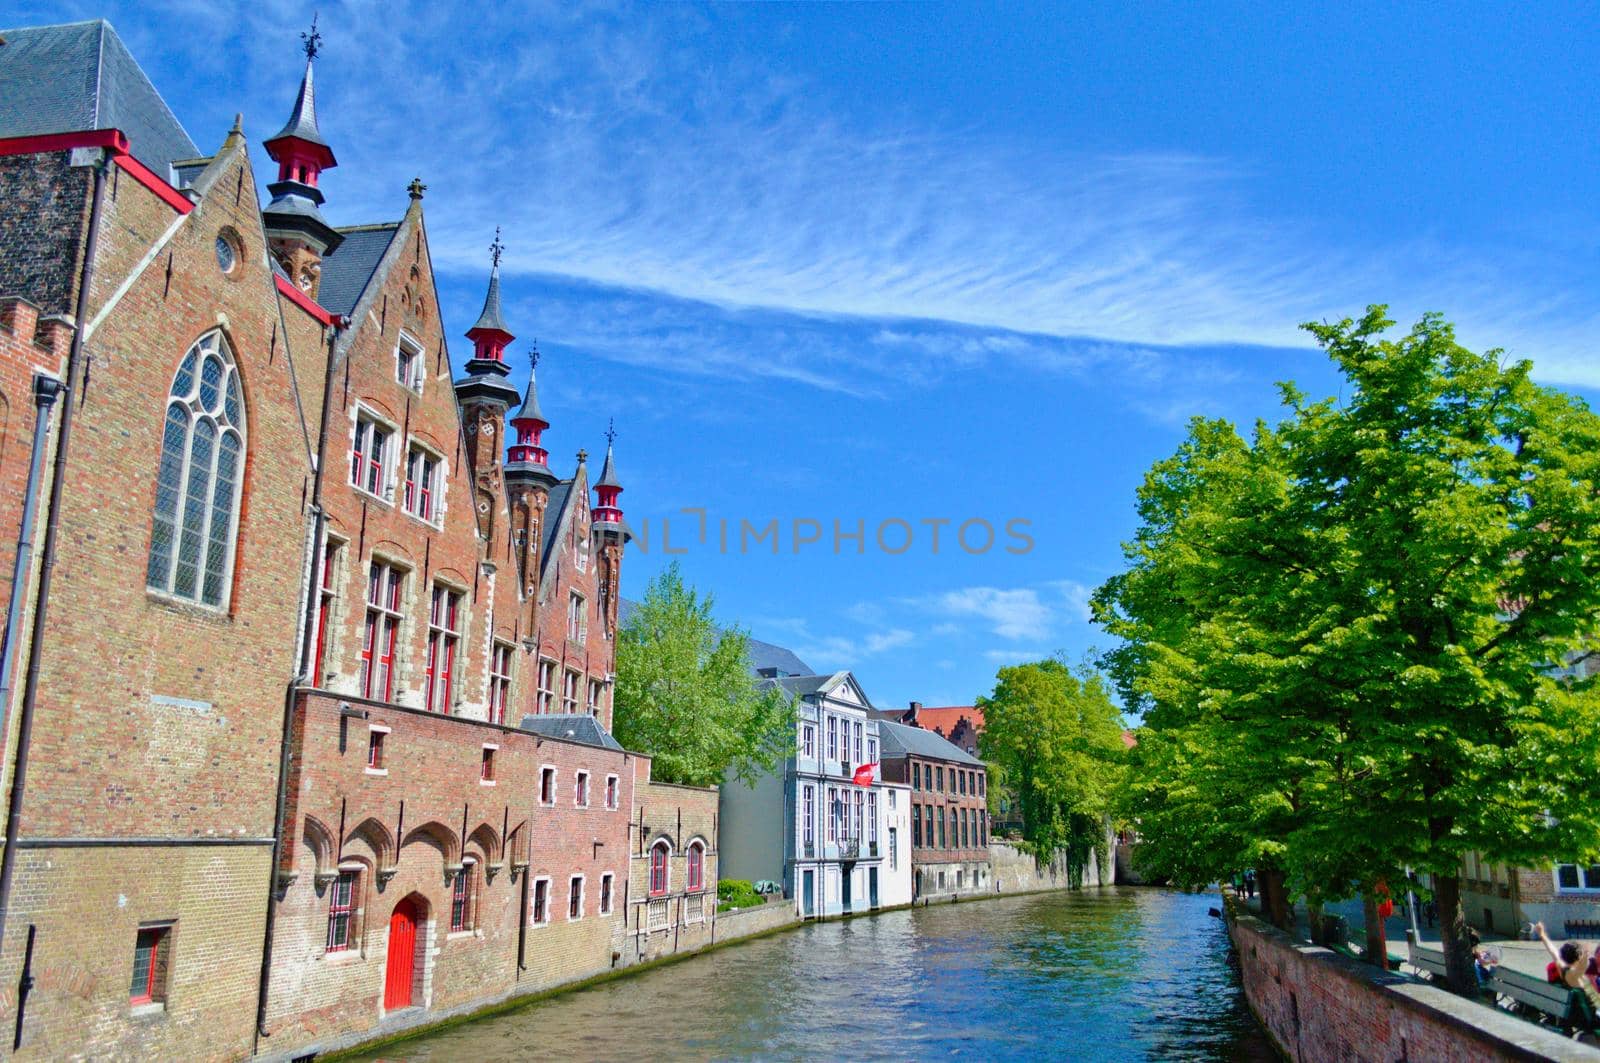 Picturesque houses by the canal in Brugge, Belgium. by hernan_hyper